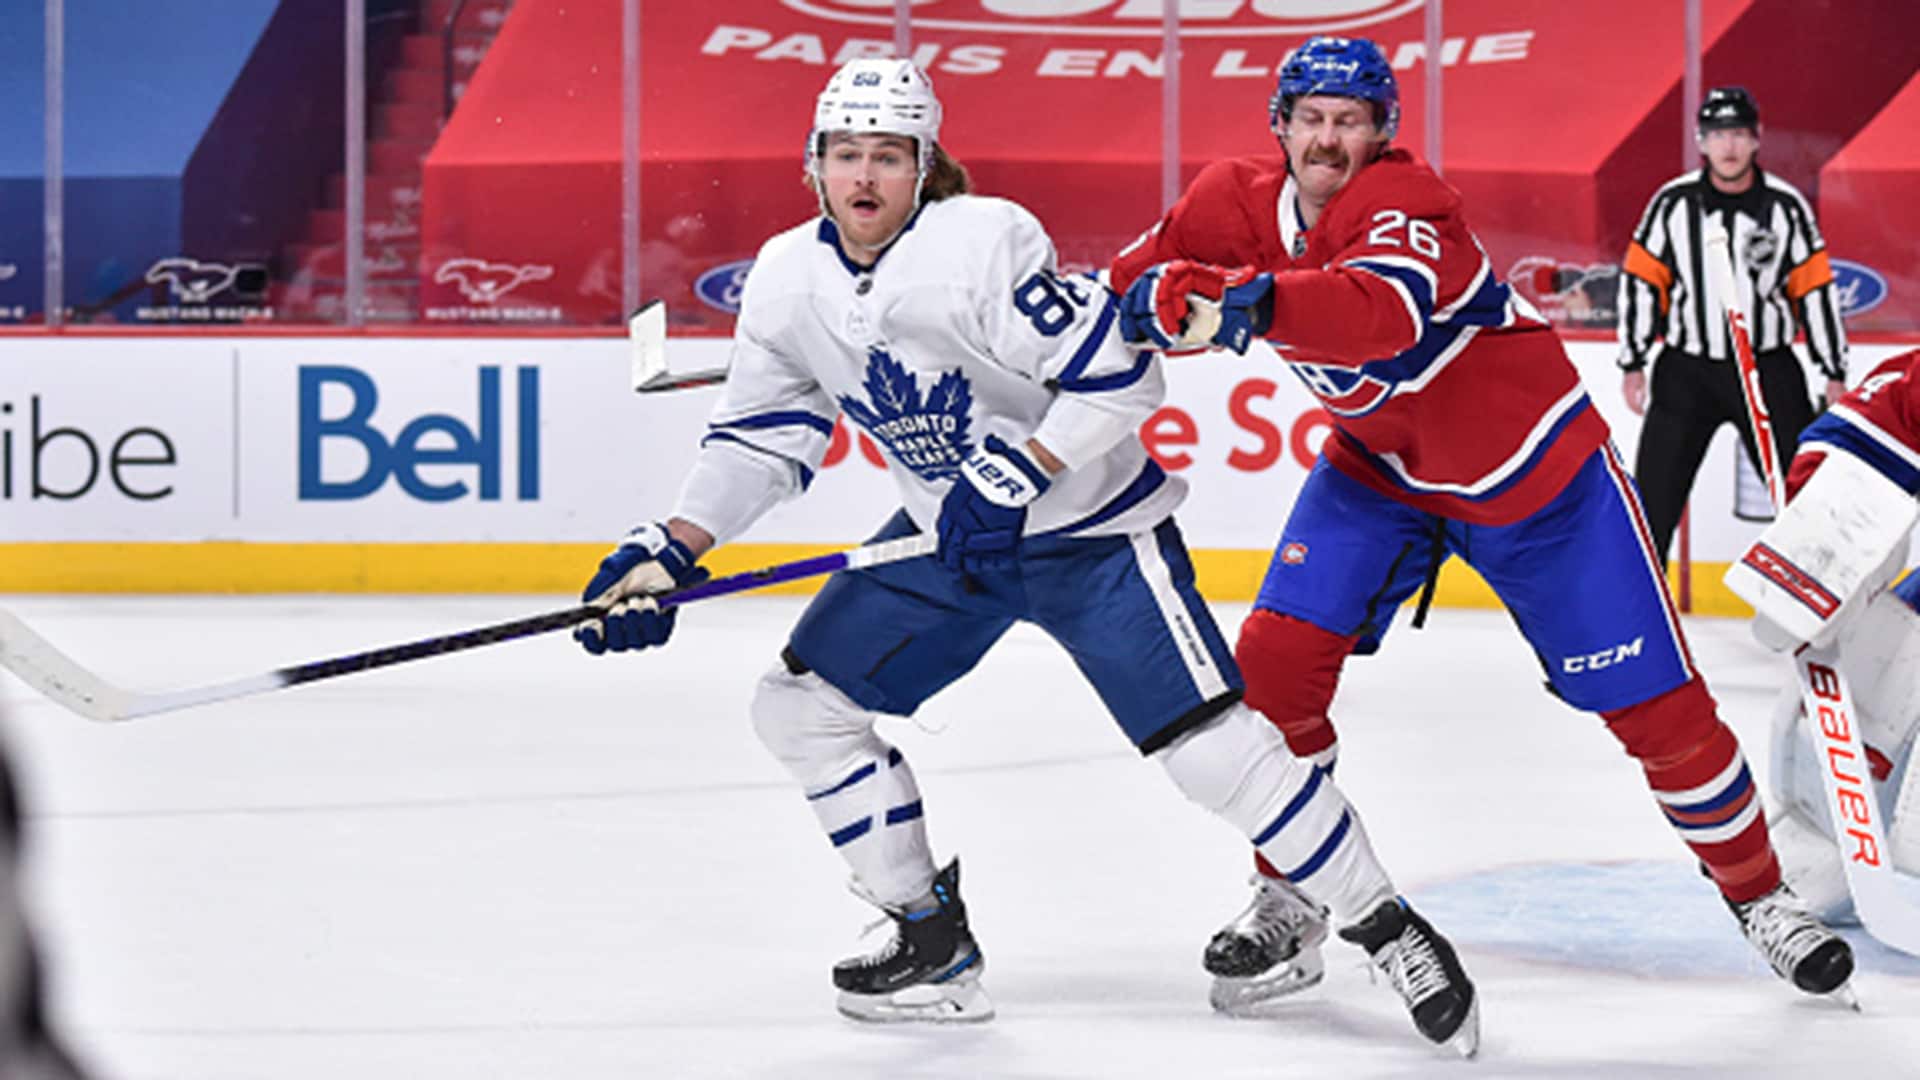 Leafs ready for Habs to bring on physical play 'This is what the